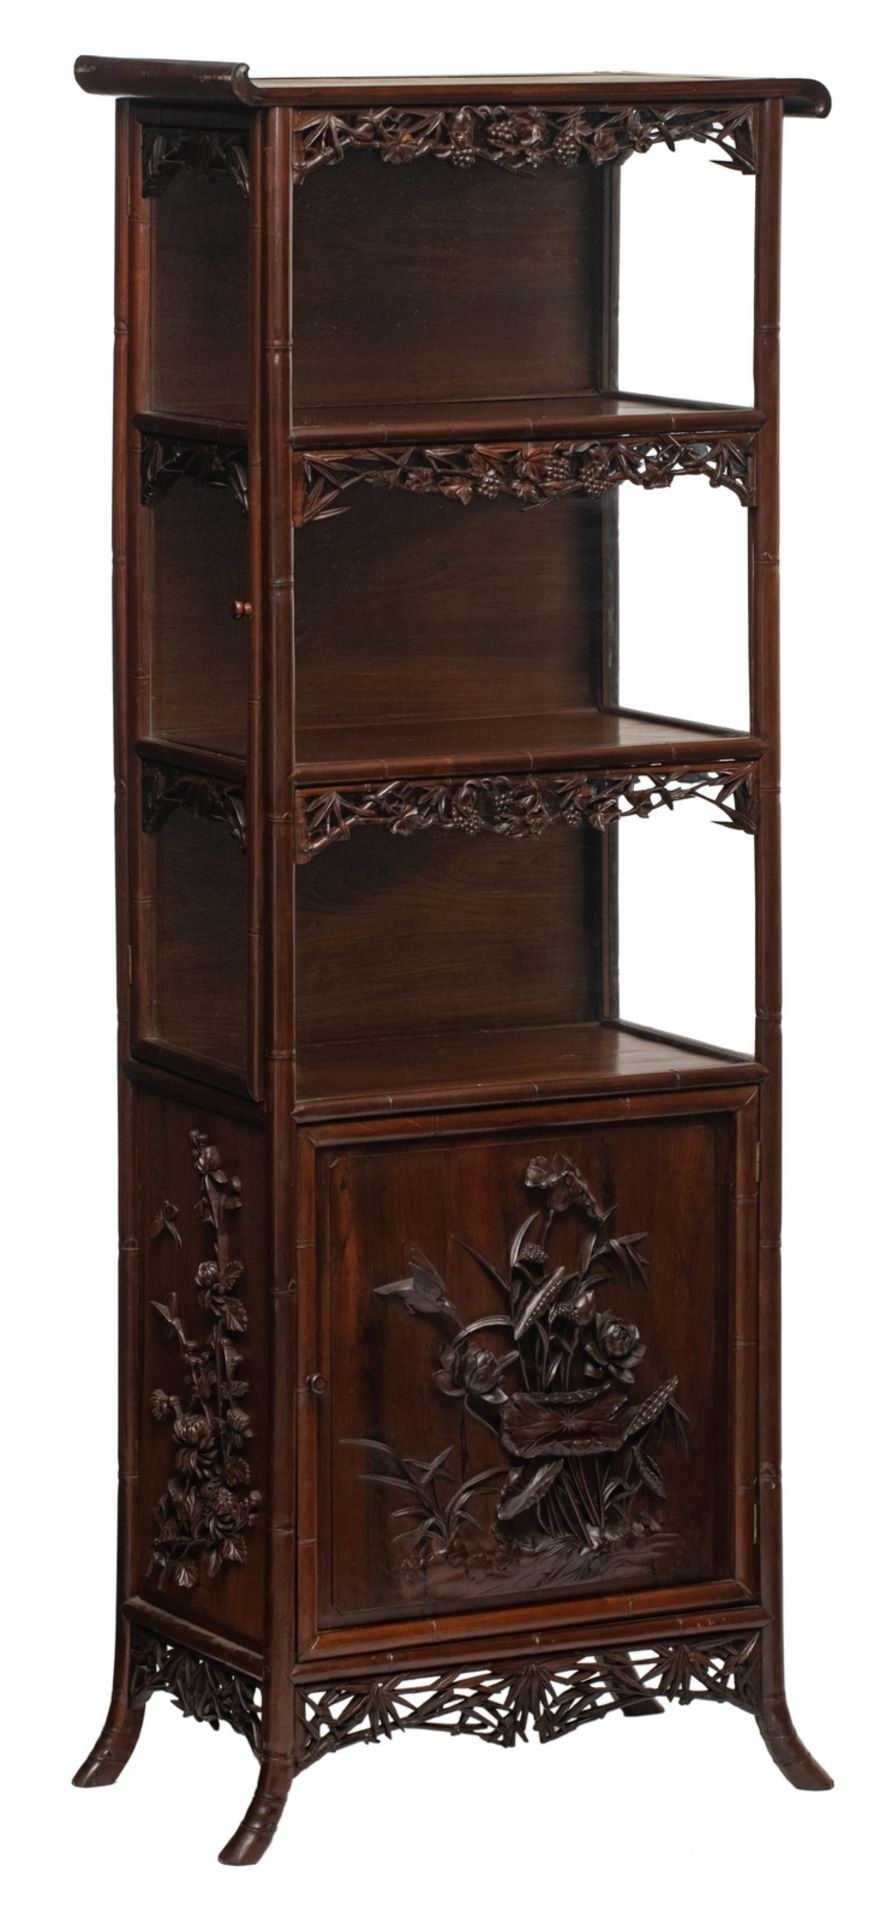 An Oriental richly carved hardwood display cabinet with bamboo imitation, the panels decorated